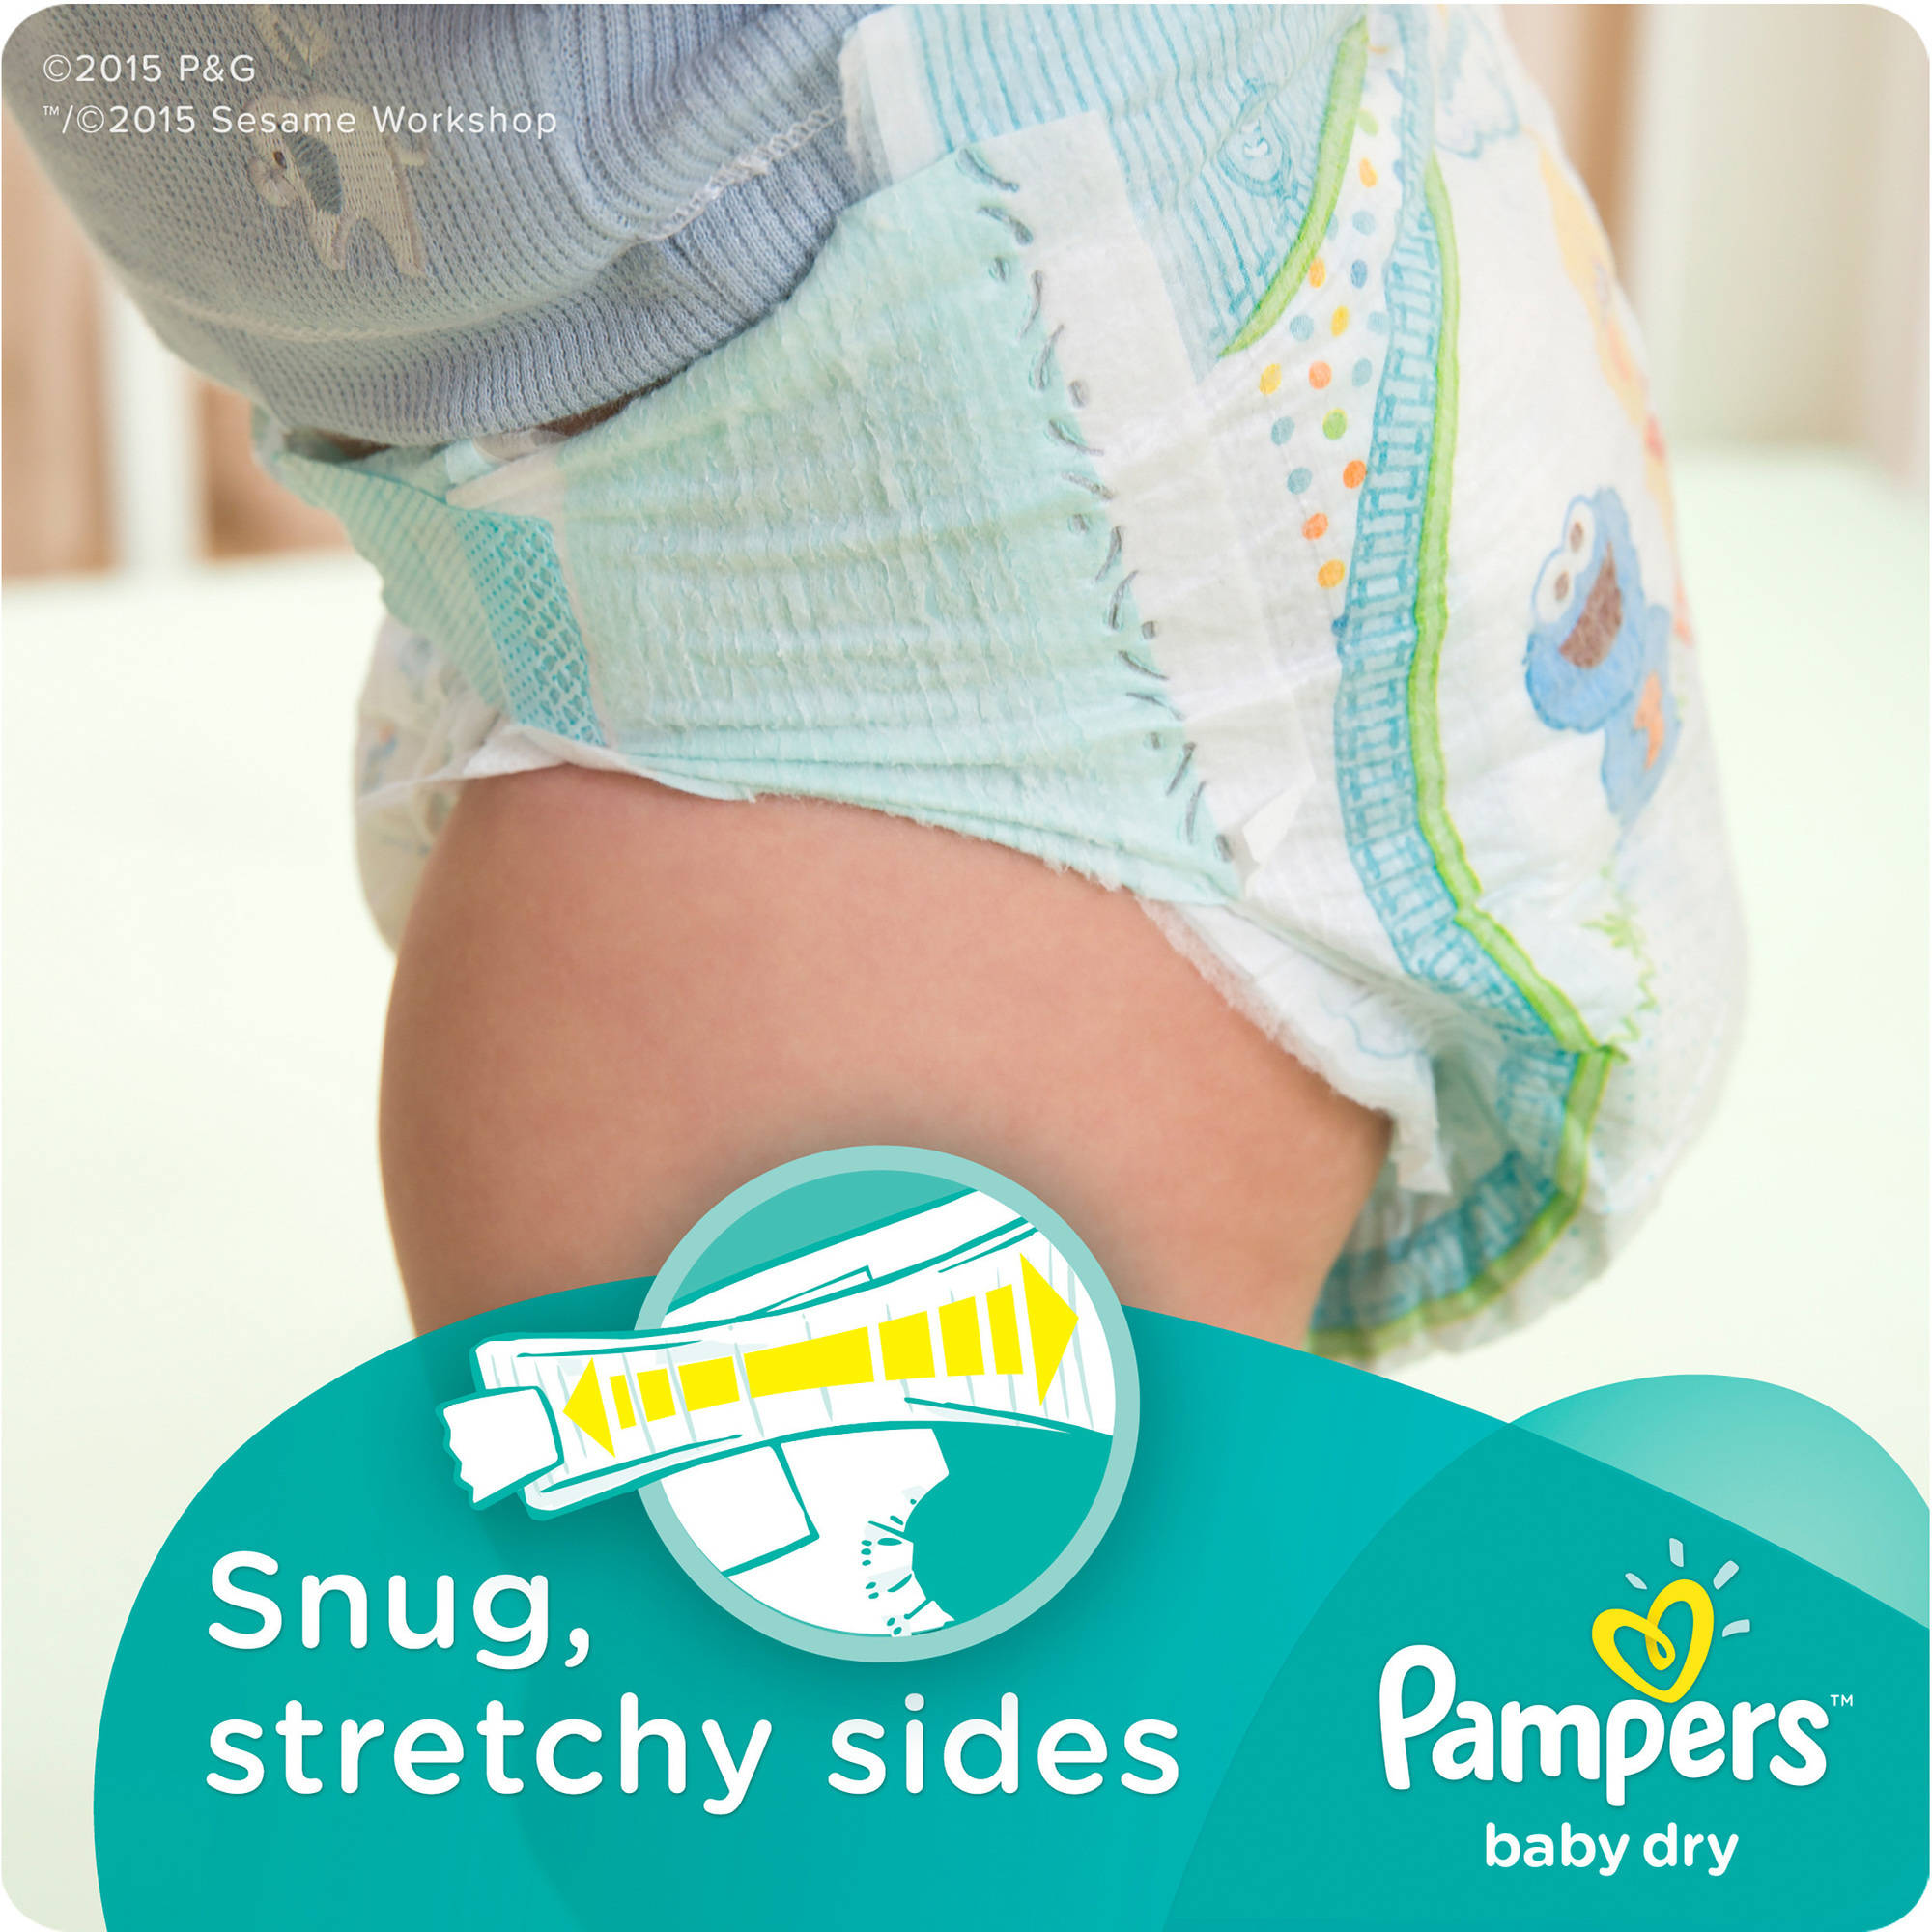 Pampers Baby Dry Diapers, Huge Pack, Size 1, 198 Diapers - image 4 of 8